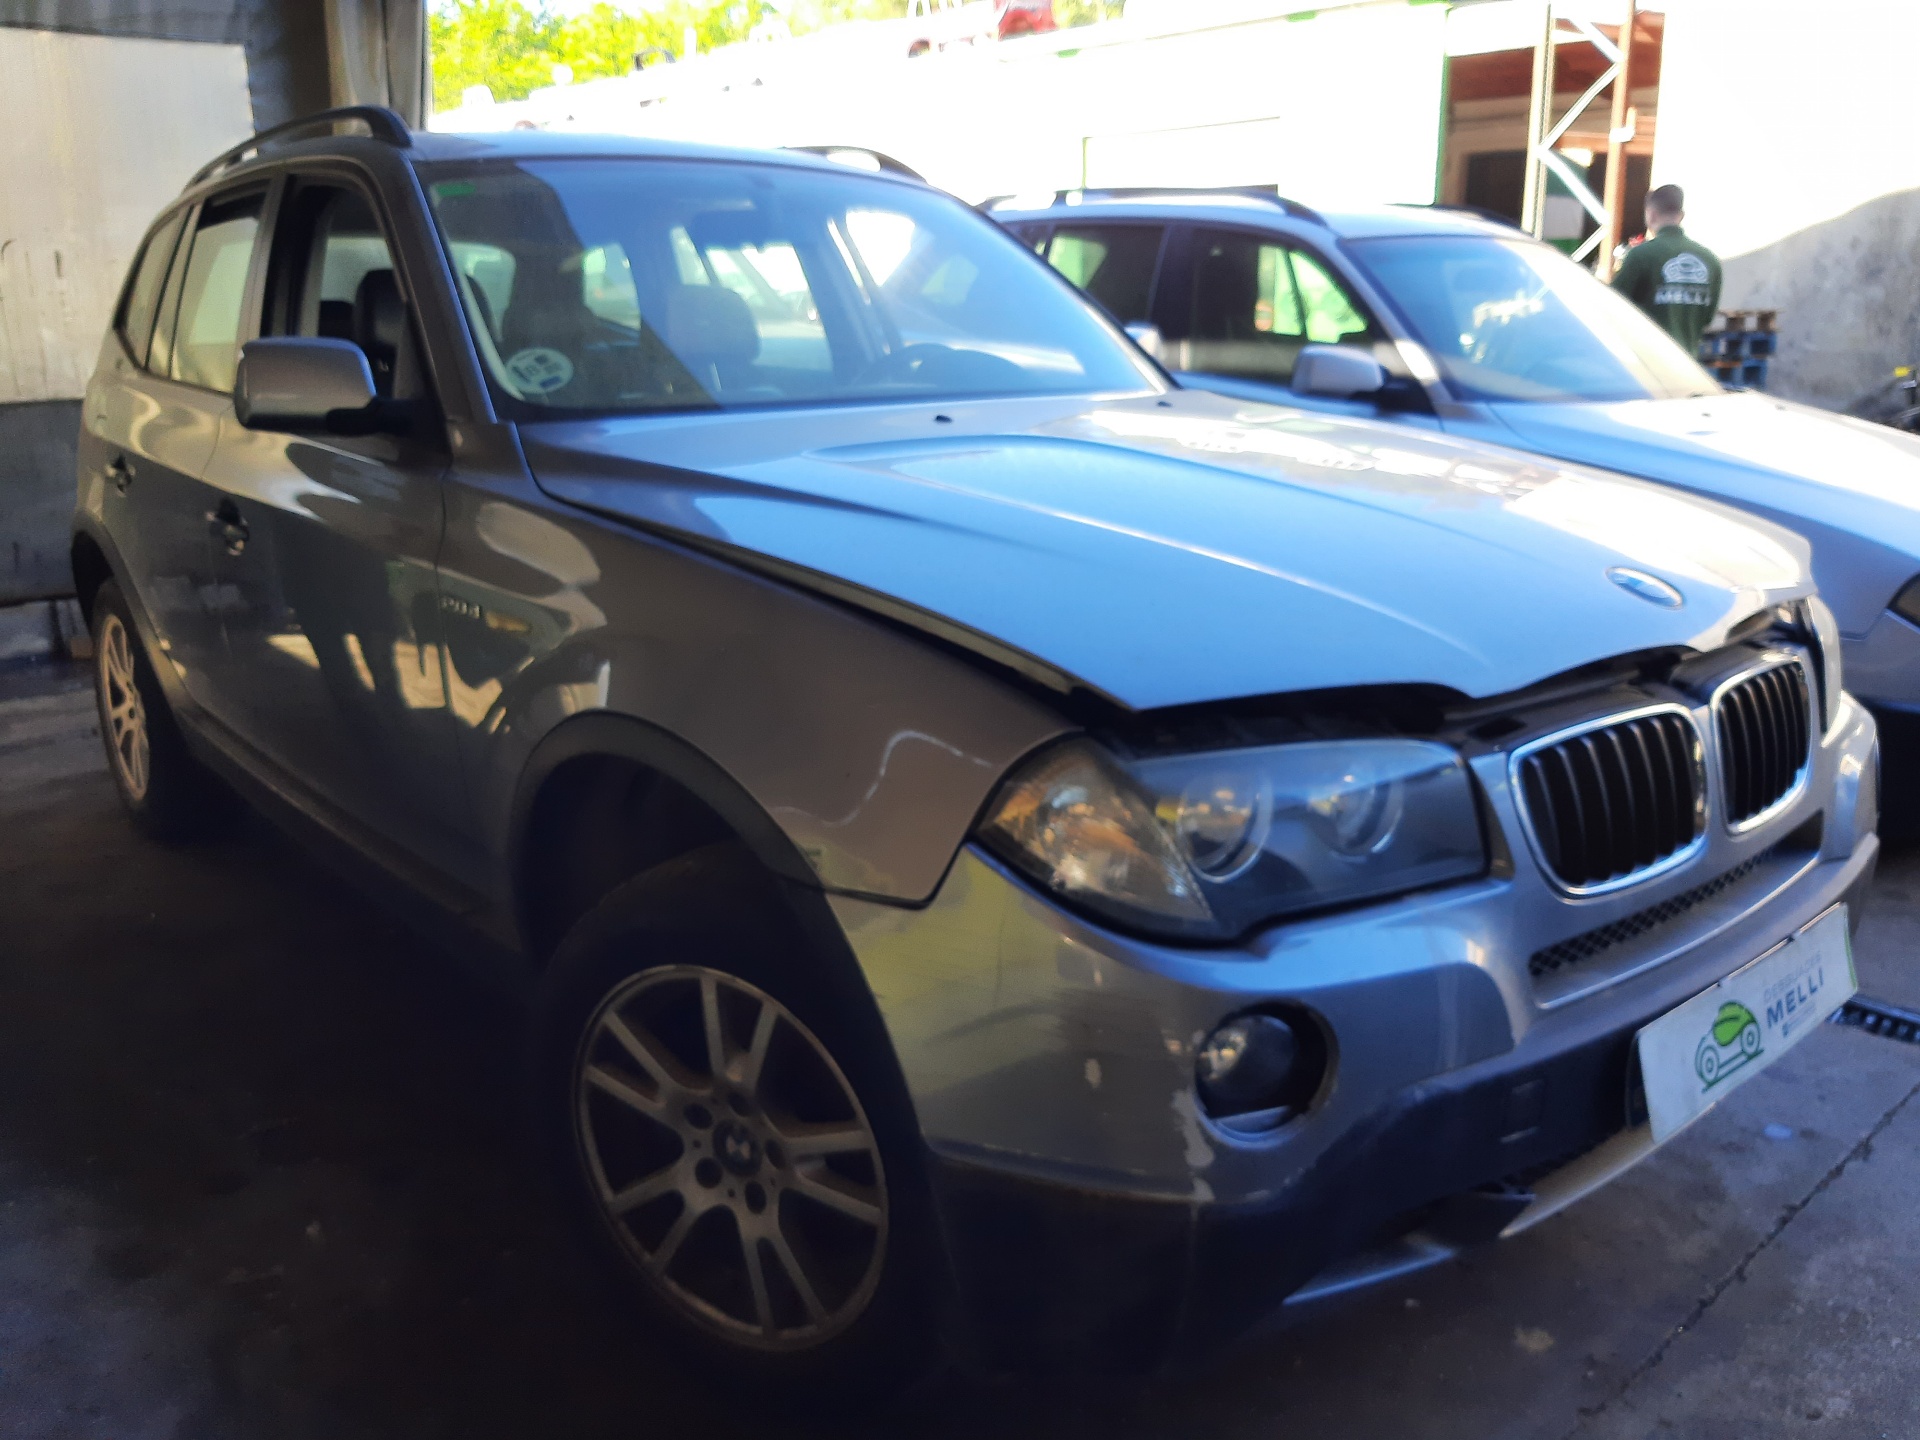 BMW X3 E83 (2003-2010) Other Body Parts 51243400379 25007010